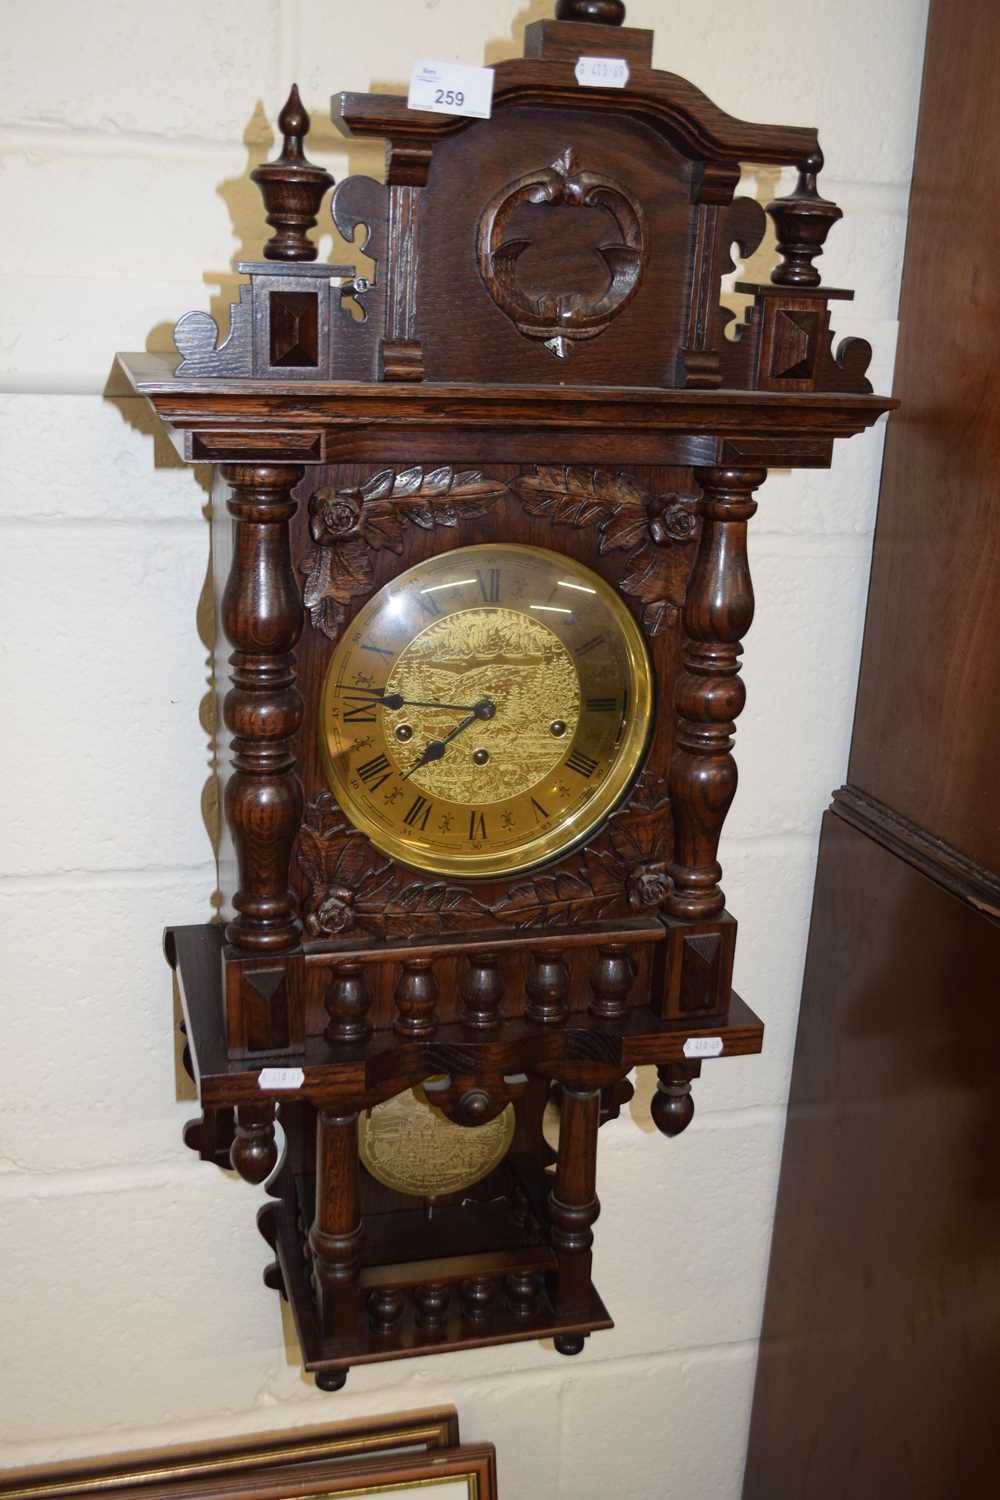 20th Century oak cased wall clock with brass movement striking on rods